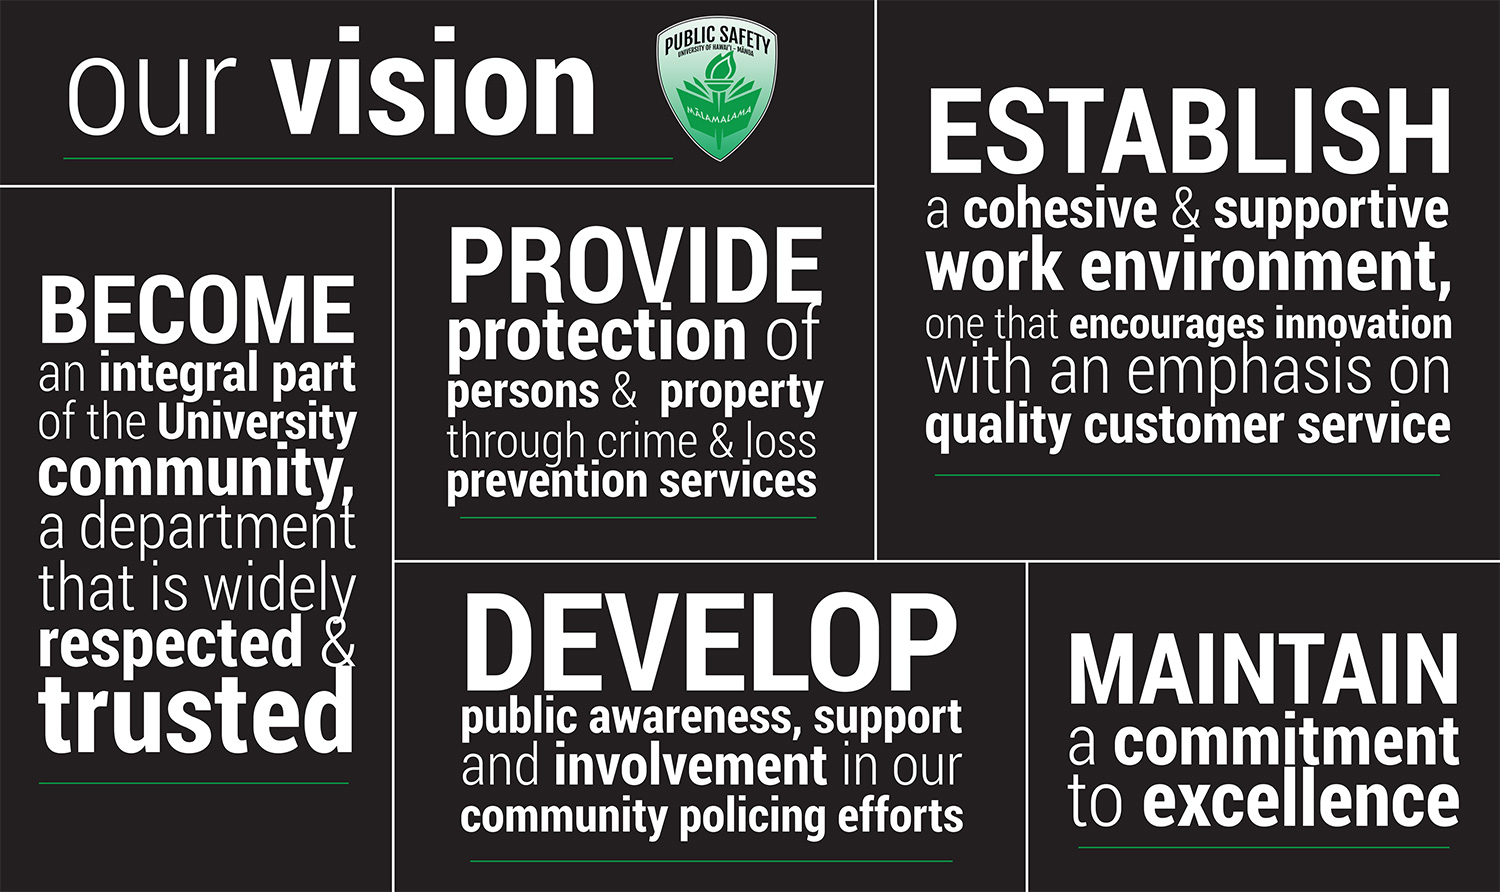 Our Vision: Become an integral part of the University community, a department that is widely respected and trusted. Provide protection of persons and property through crime and loss prevention services. Develop public awareness, support and involvedment in our community policing efforts. Establish a cohesive and supportive work environment, one that encourages innovation with an emphasis on quality customer service. Maintain a commitment to excellence.